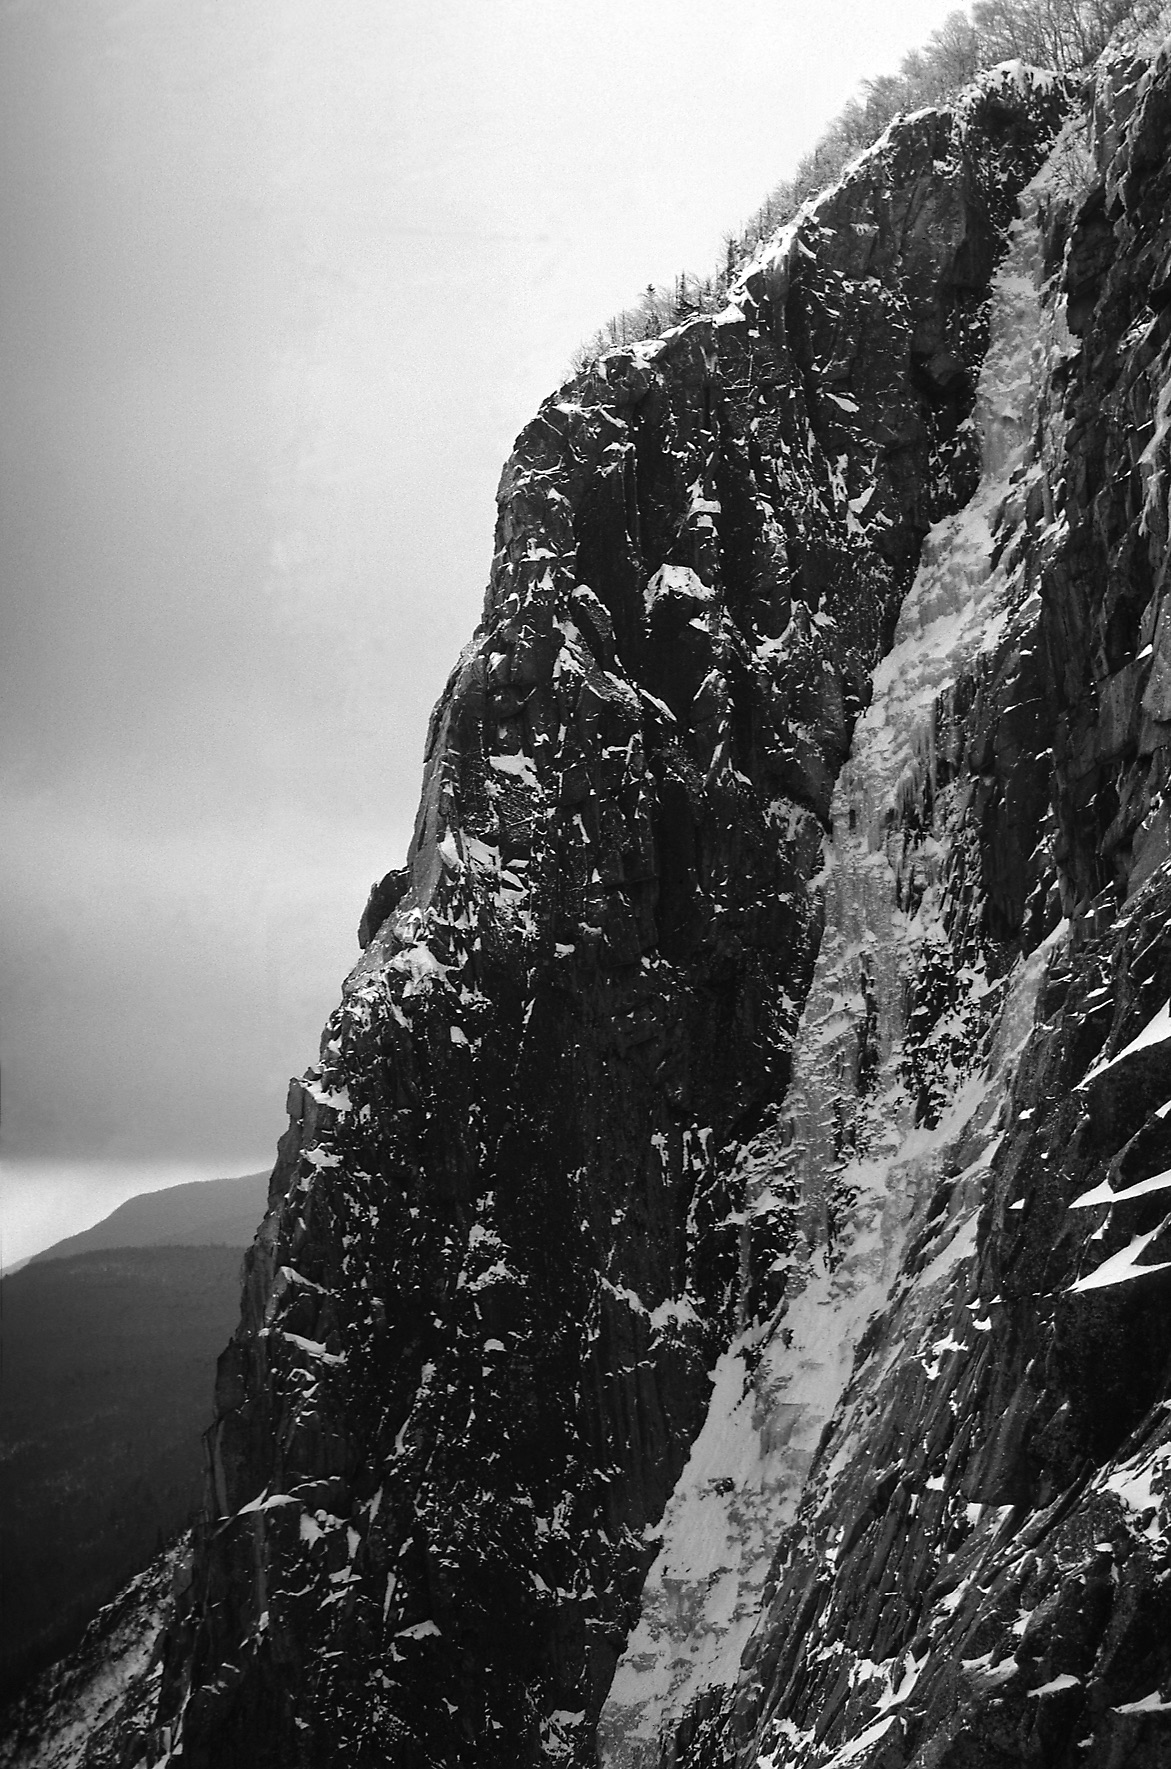 The Black Dike, Cannon Cliff, New Hampshire, 1970s. Laura Waterman was the first woman to climb the route, four years after John Bouchard's 1971 first ascent. [Photo] Ed Webster